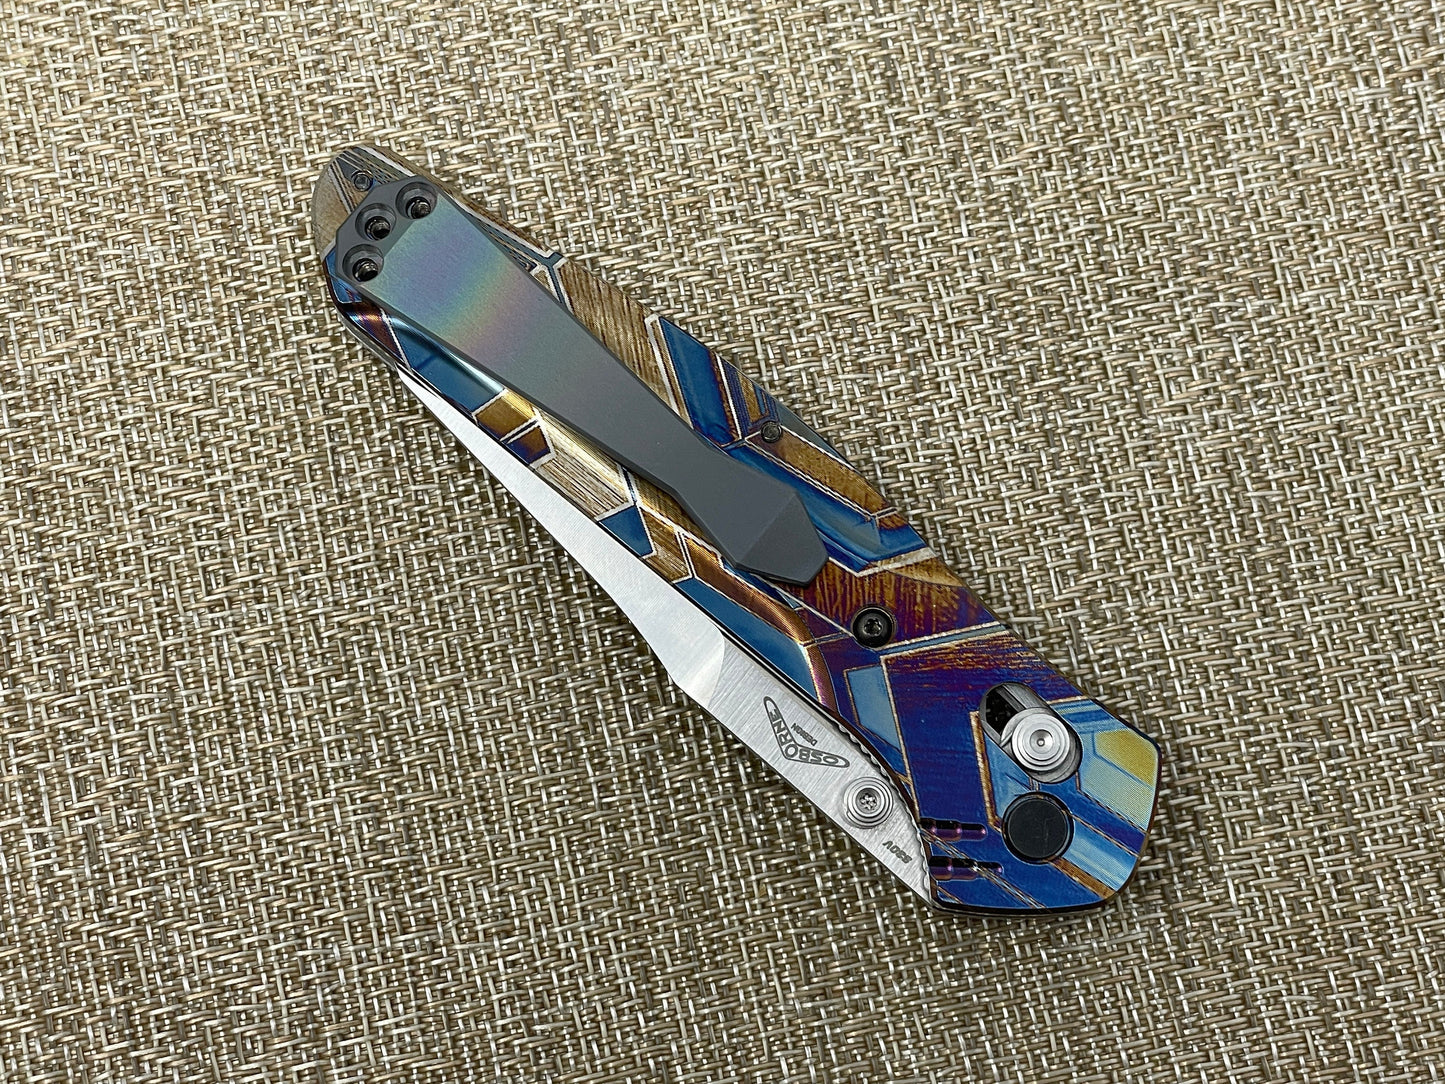 Black Rainbow flamed Zirconium Dmd CLIP for most Benchmade models